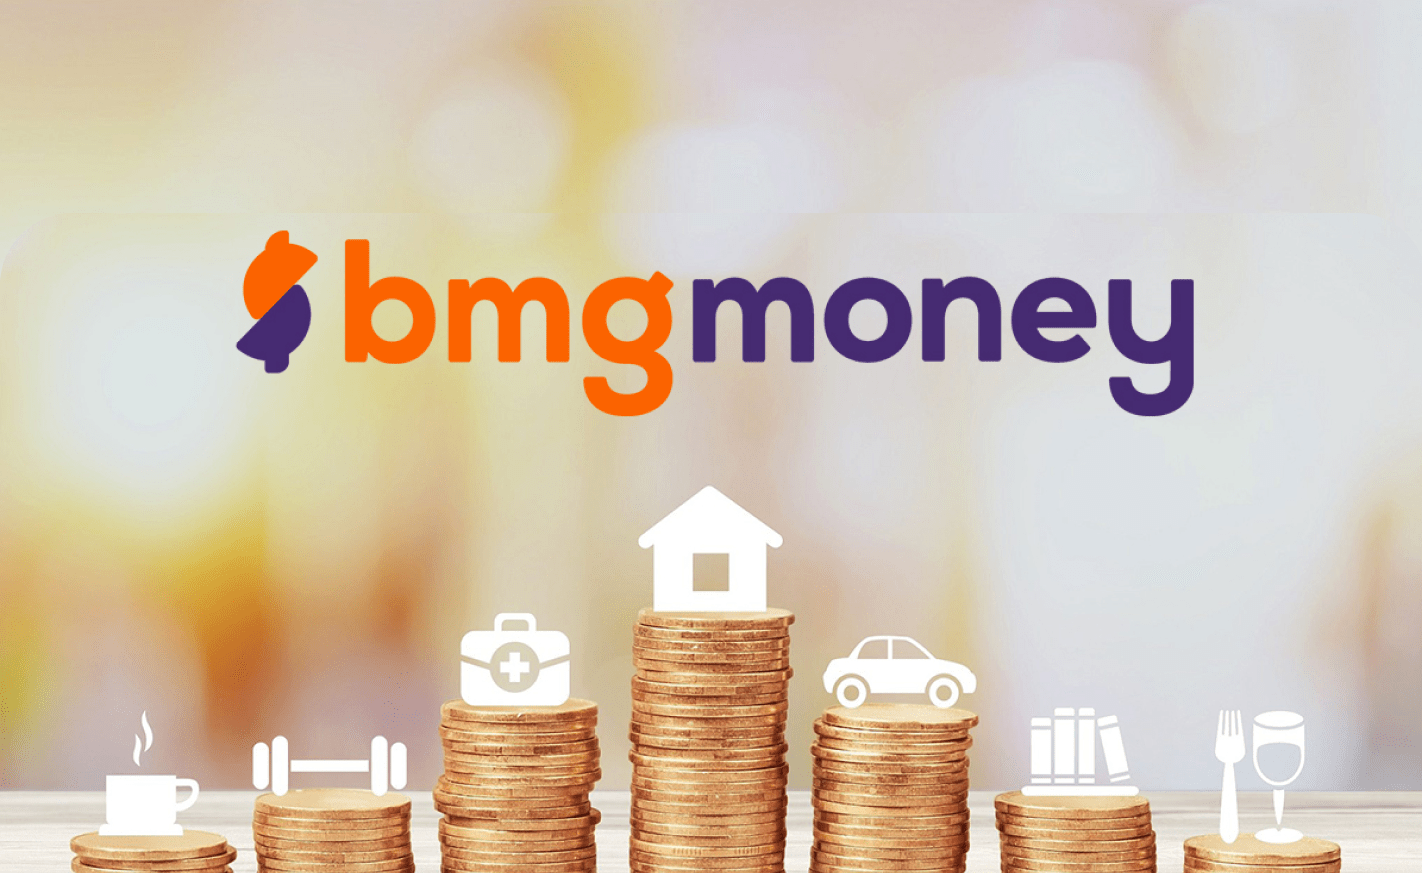 New case study - see how BMG Money increased qualified leads by 42% with SegmentStream